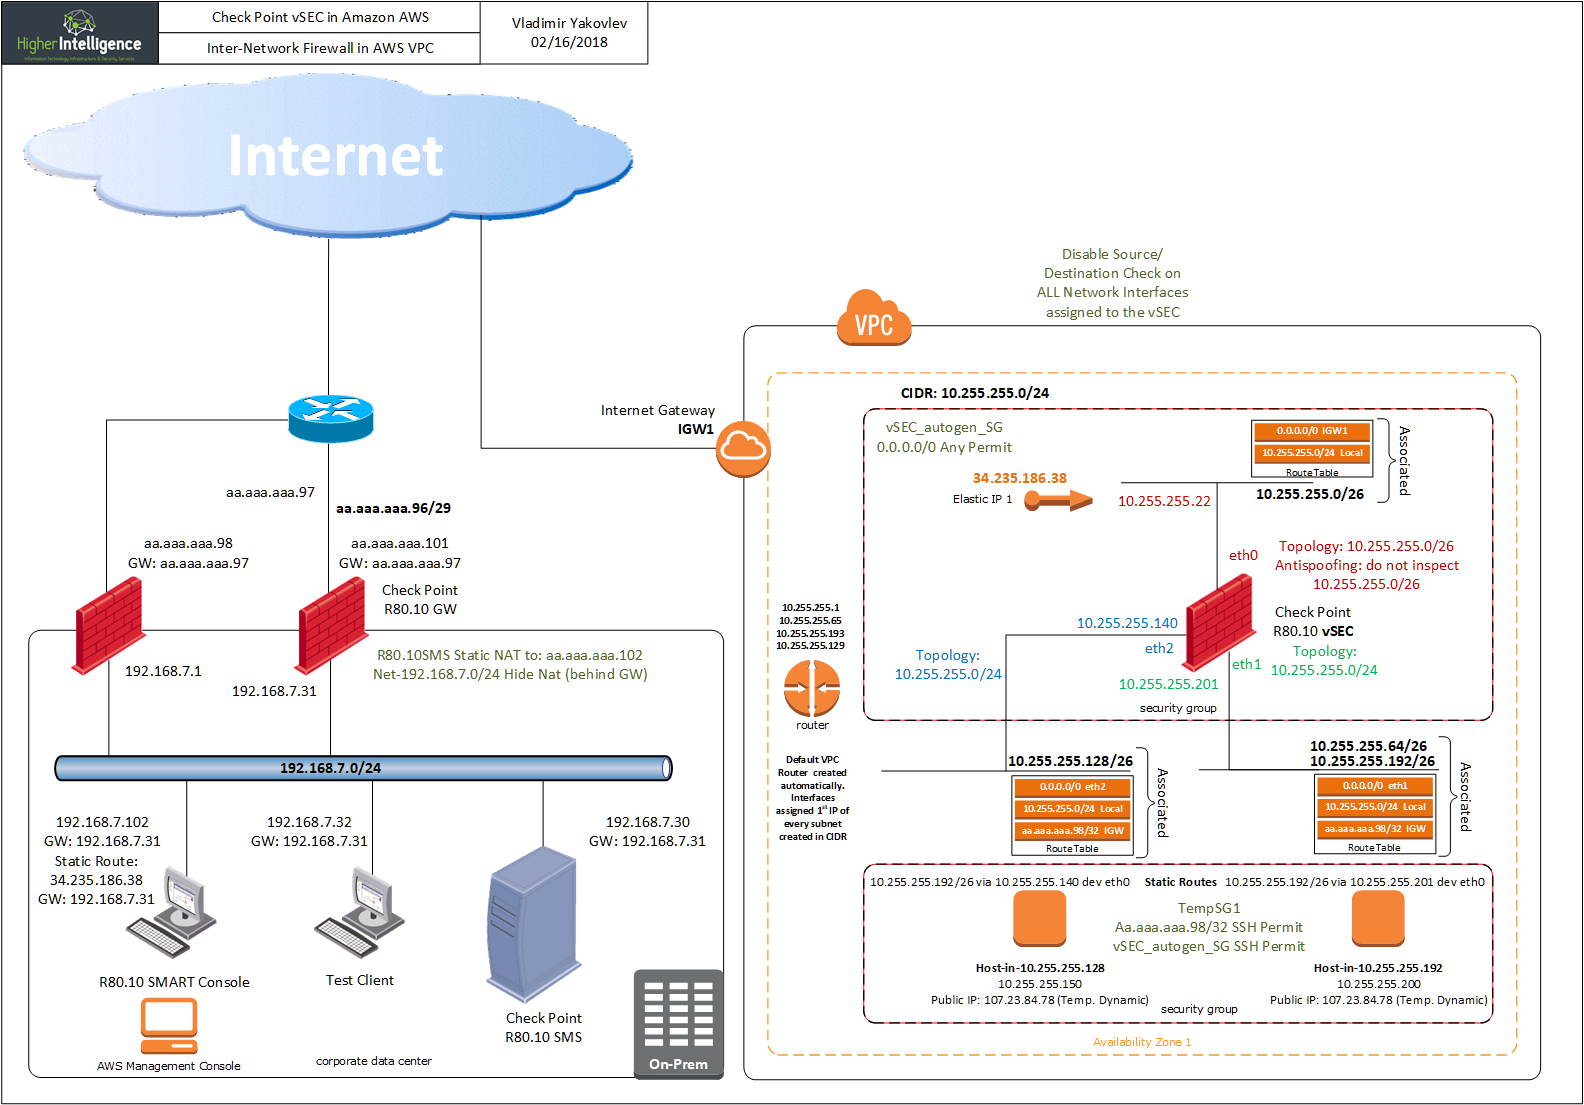 Inter-Network Firewall in AWS VPC